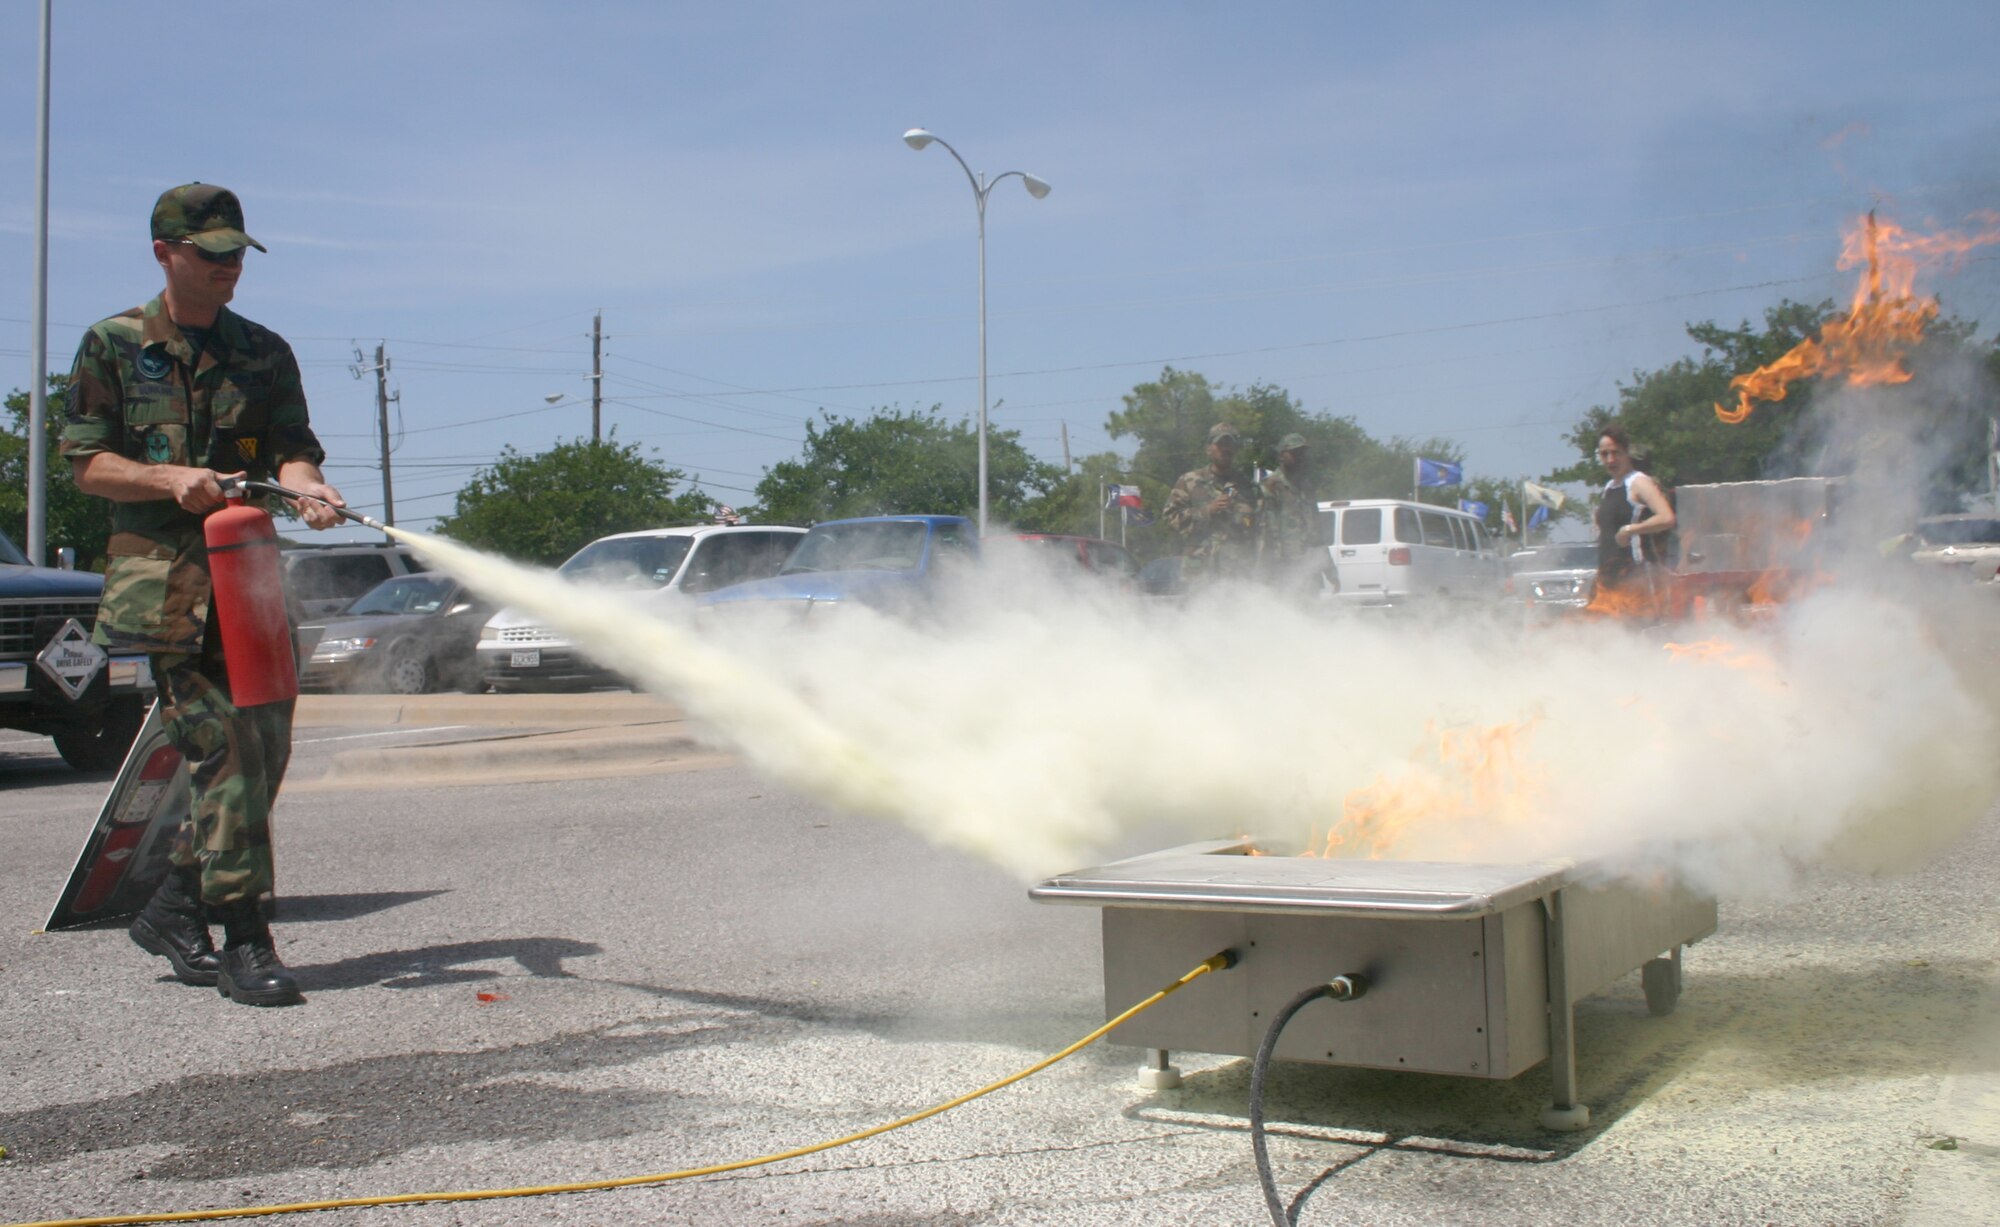 Staff Sgt. Jonathan Murkins, from the 360th Training Squadron, puts out a controlled fire with a fire extinguisher as part of the Sheppard Fire Department’s display and briefing during the Safety Day Fair May 26. Members of the fire department trained spectators on how, where and when to use different types of extinguishers. (U.S. Air Force photo/Senior Airman Jacque Lickteig).